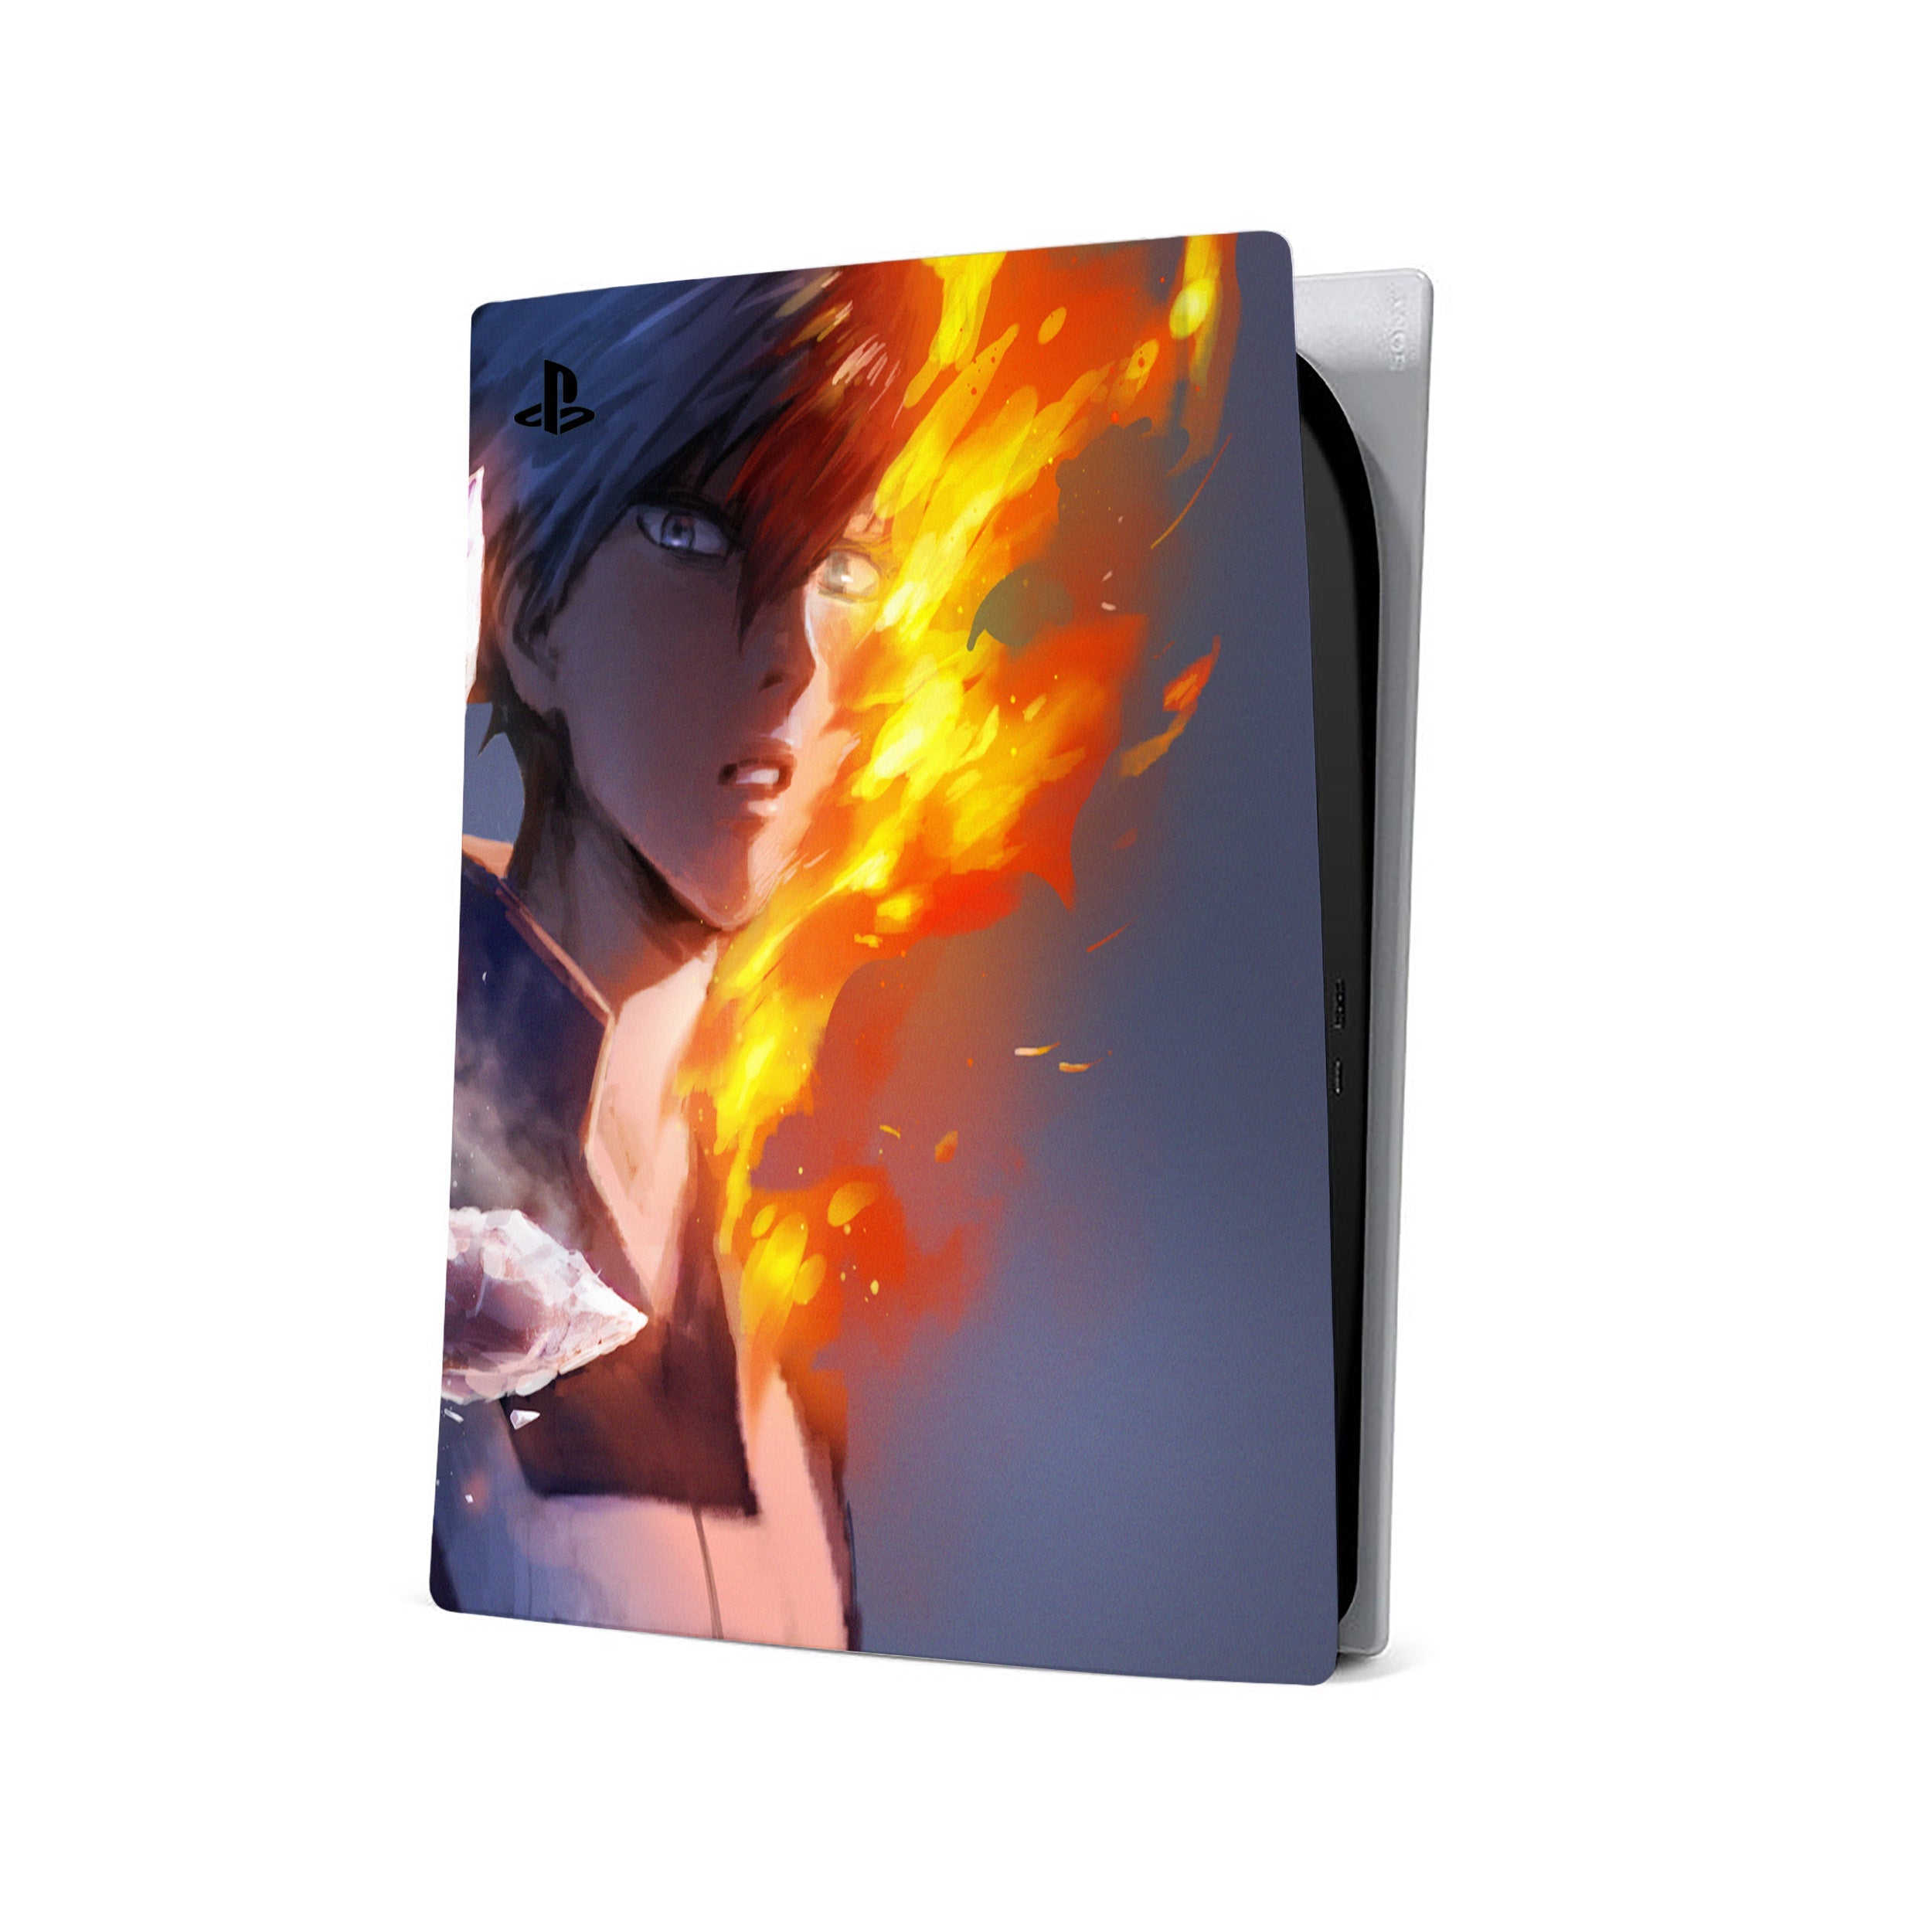 A video game skin featuring a My Hero Academia Shoto Todoroki design for the PS5.